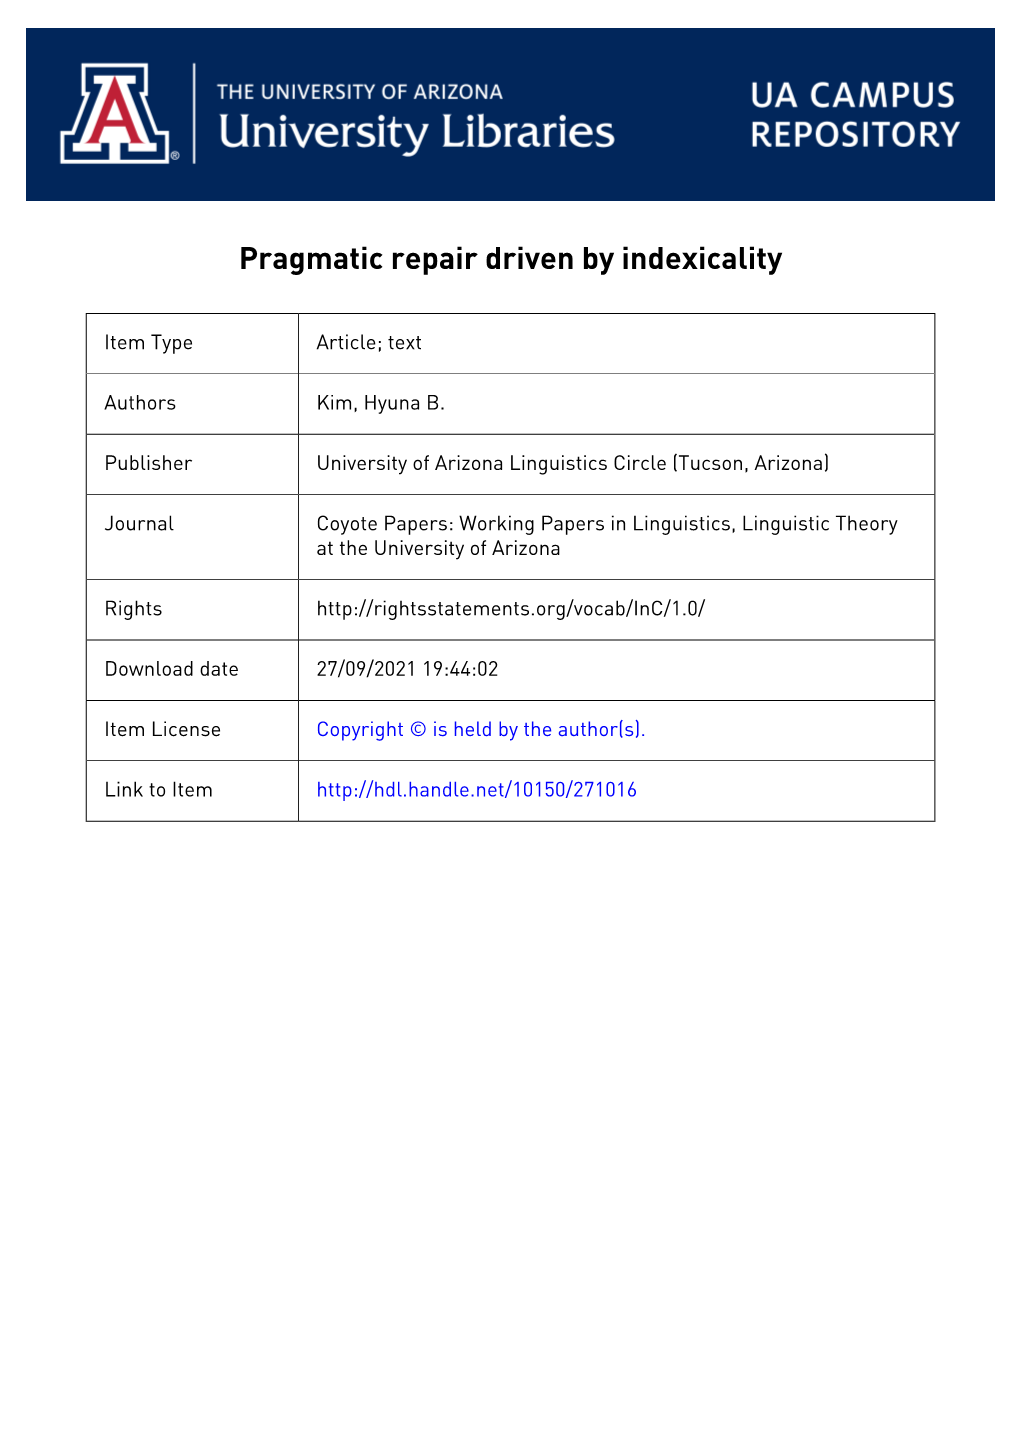 Pragmatic Repair Driven by Indexicality